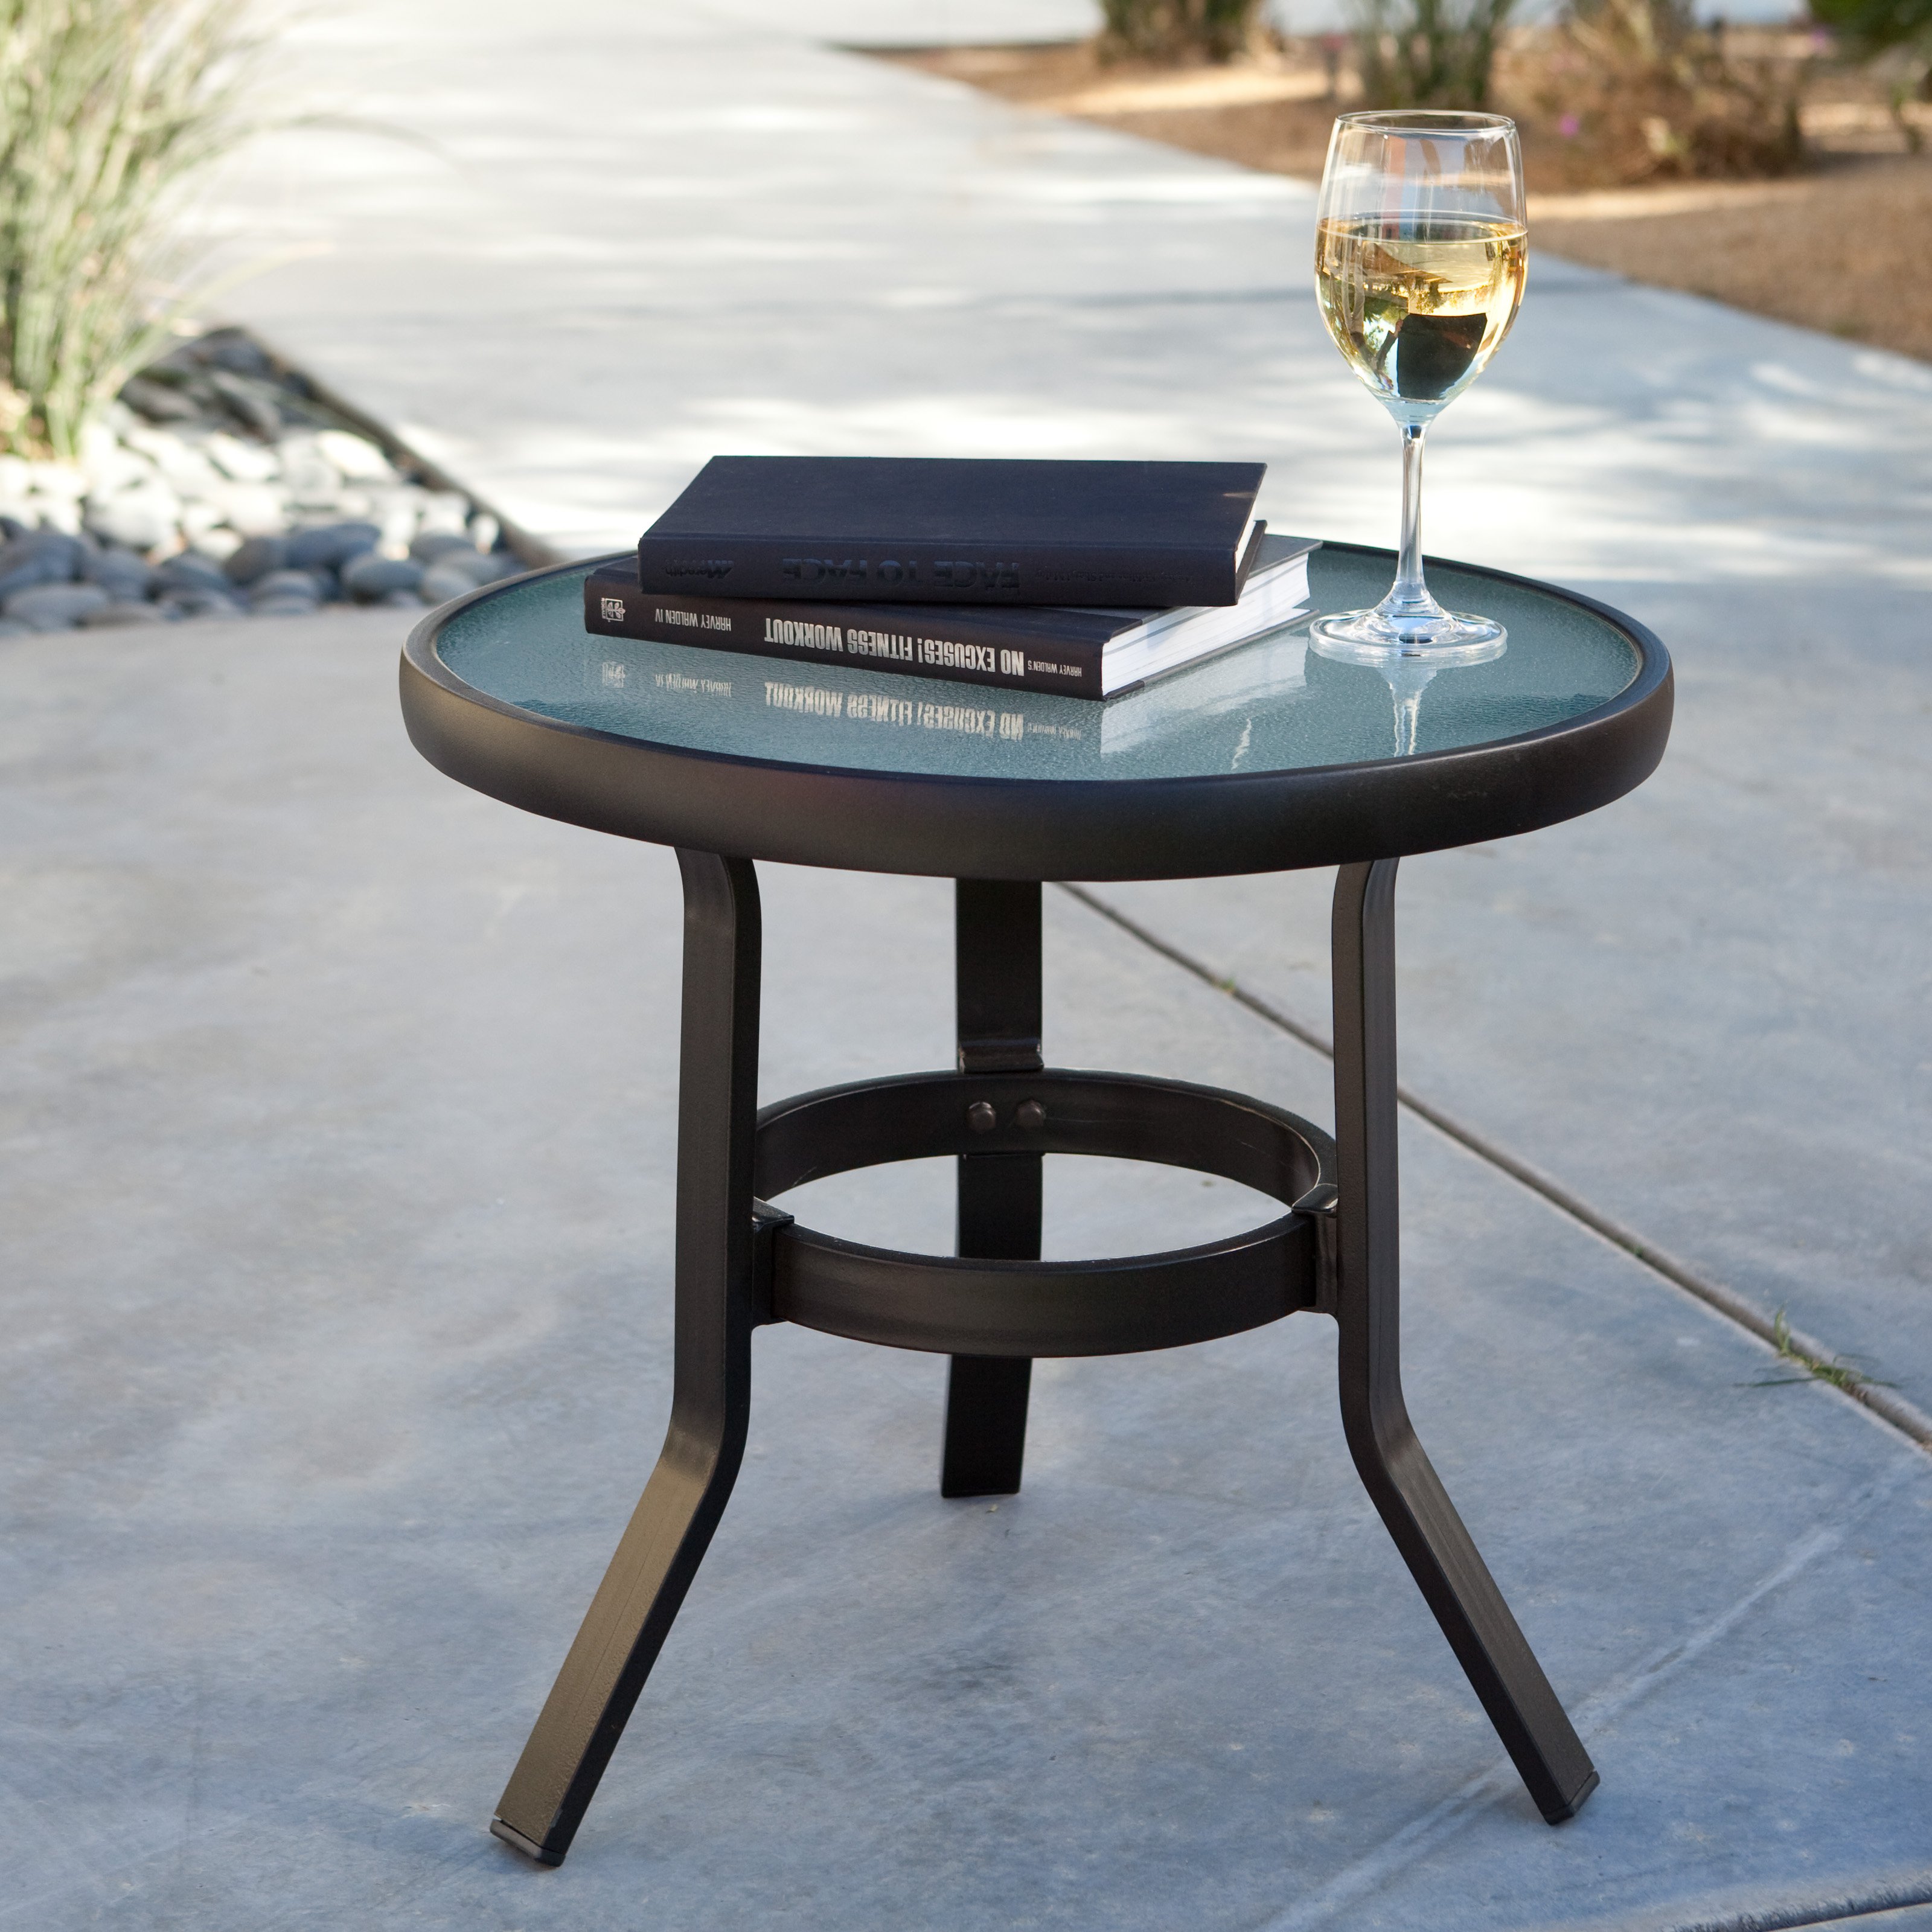 coral coast patio side table accent tables unfinished target round outdoor small chairs for bedroom coffee mat green metal black brown nest dining light fixture room essentials